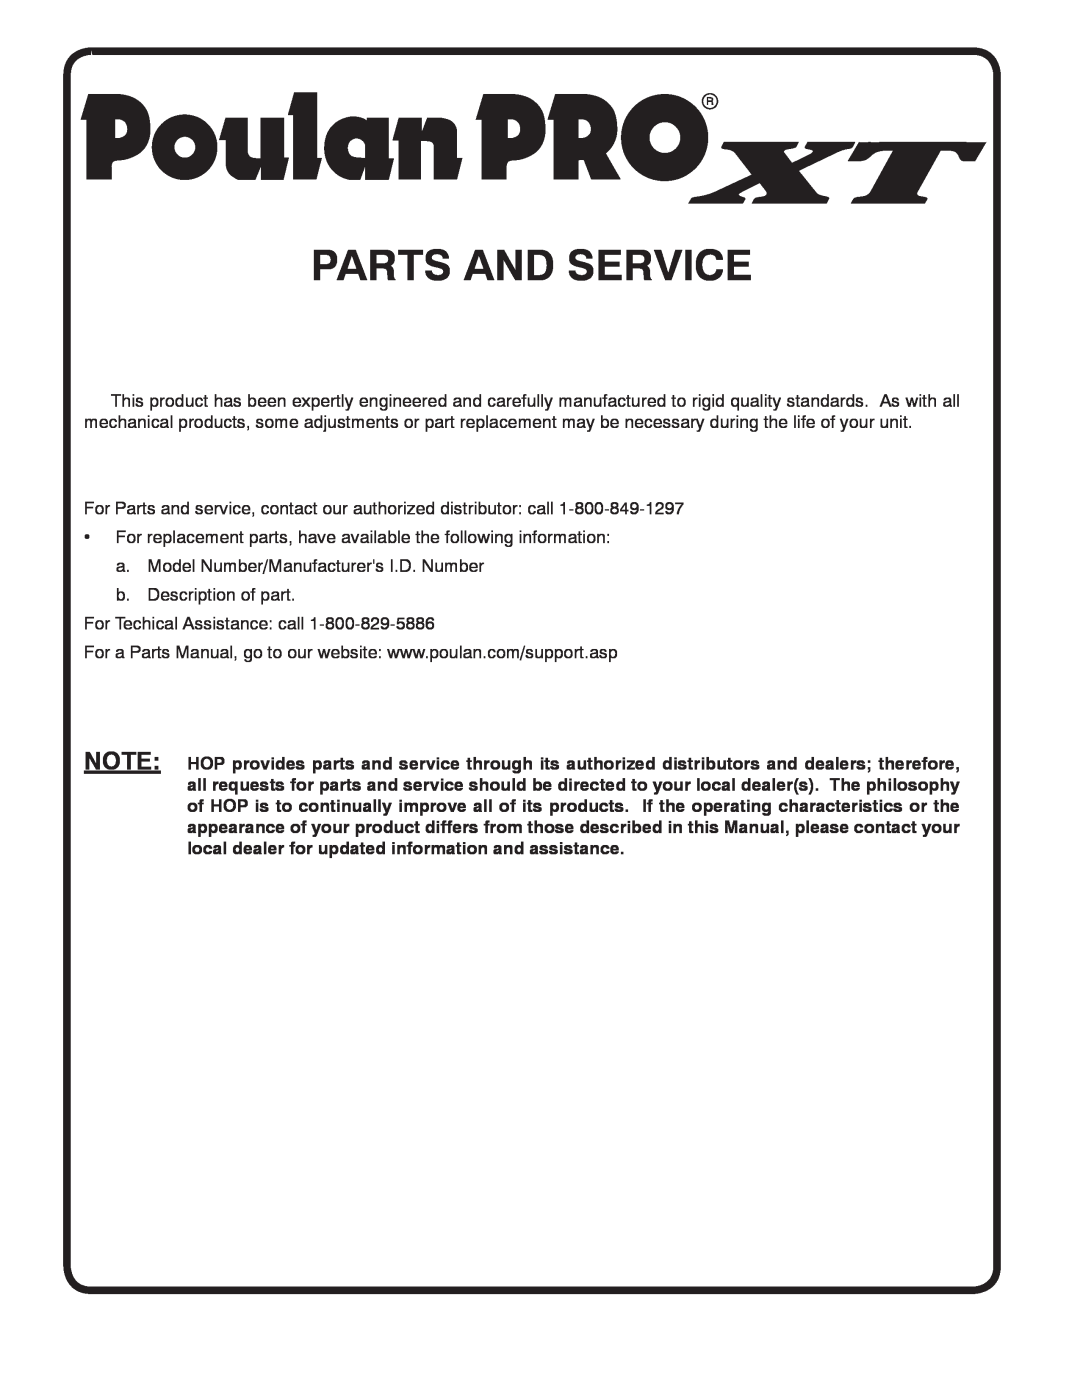 Poulan 96012010900, 433507 manual Parts And Service 